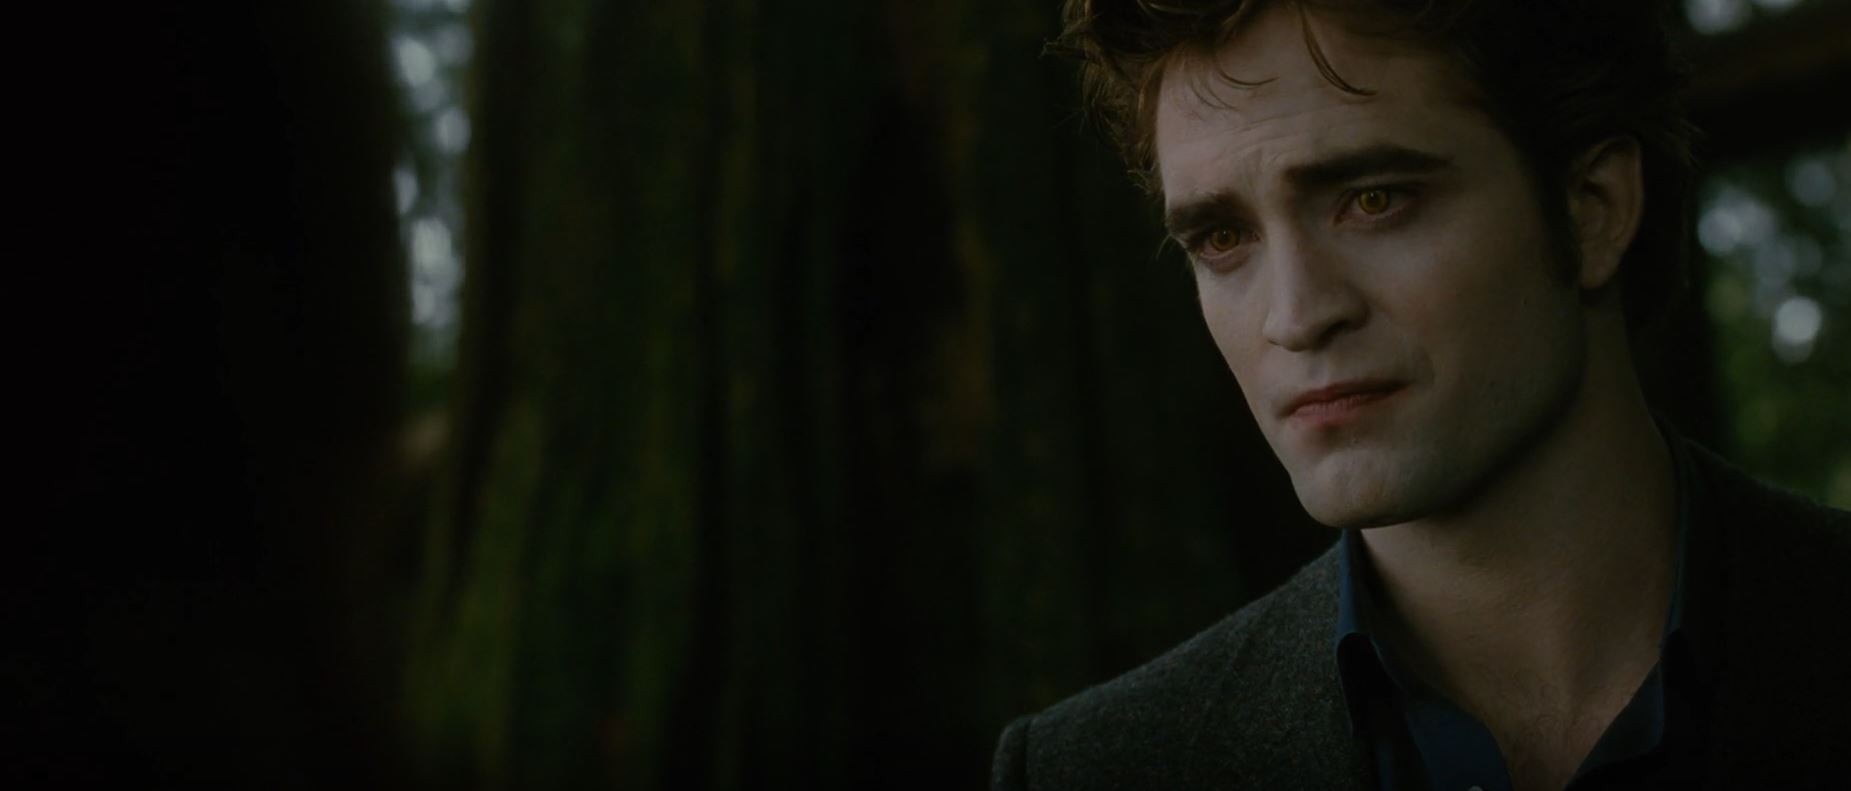 twilight’s edward cullen – biography, history, & character information